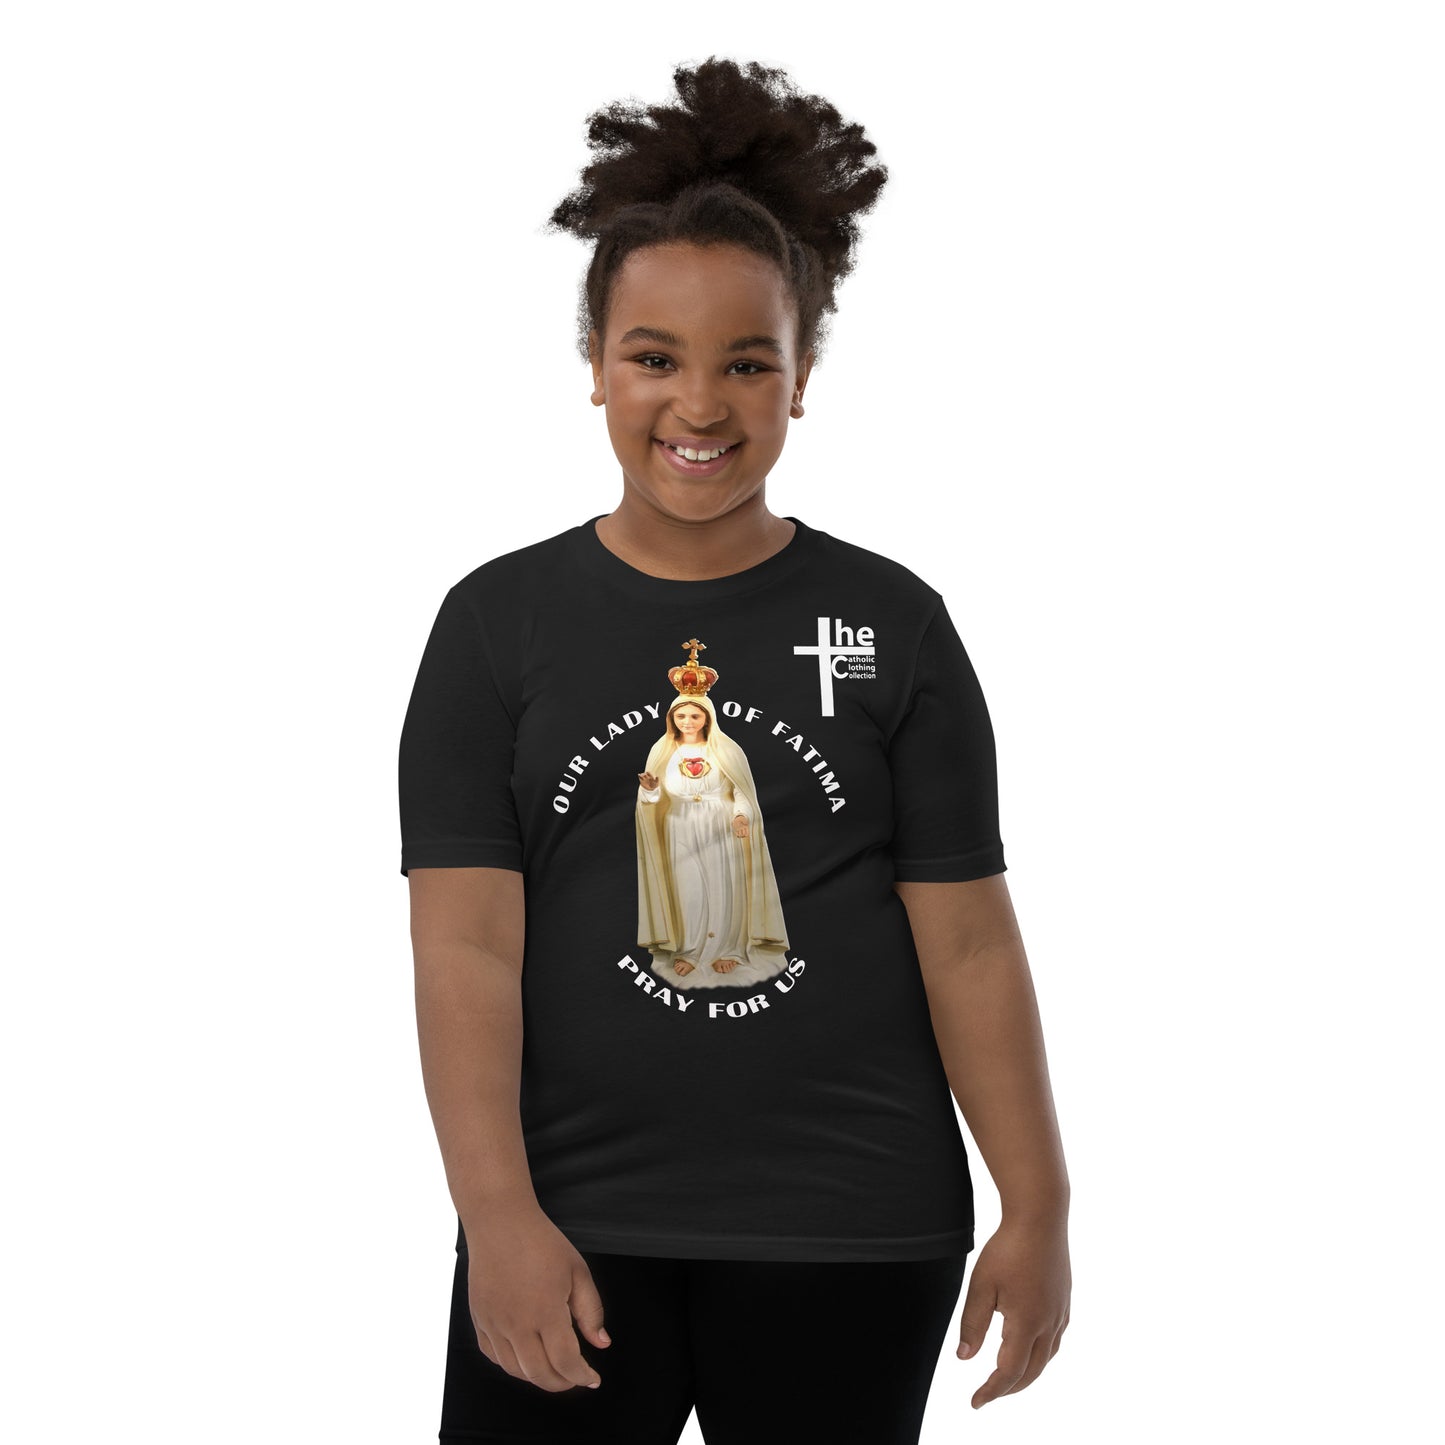 Our Lady of Fatima Pray for Us Children's t-Shirt